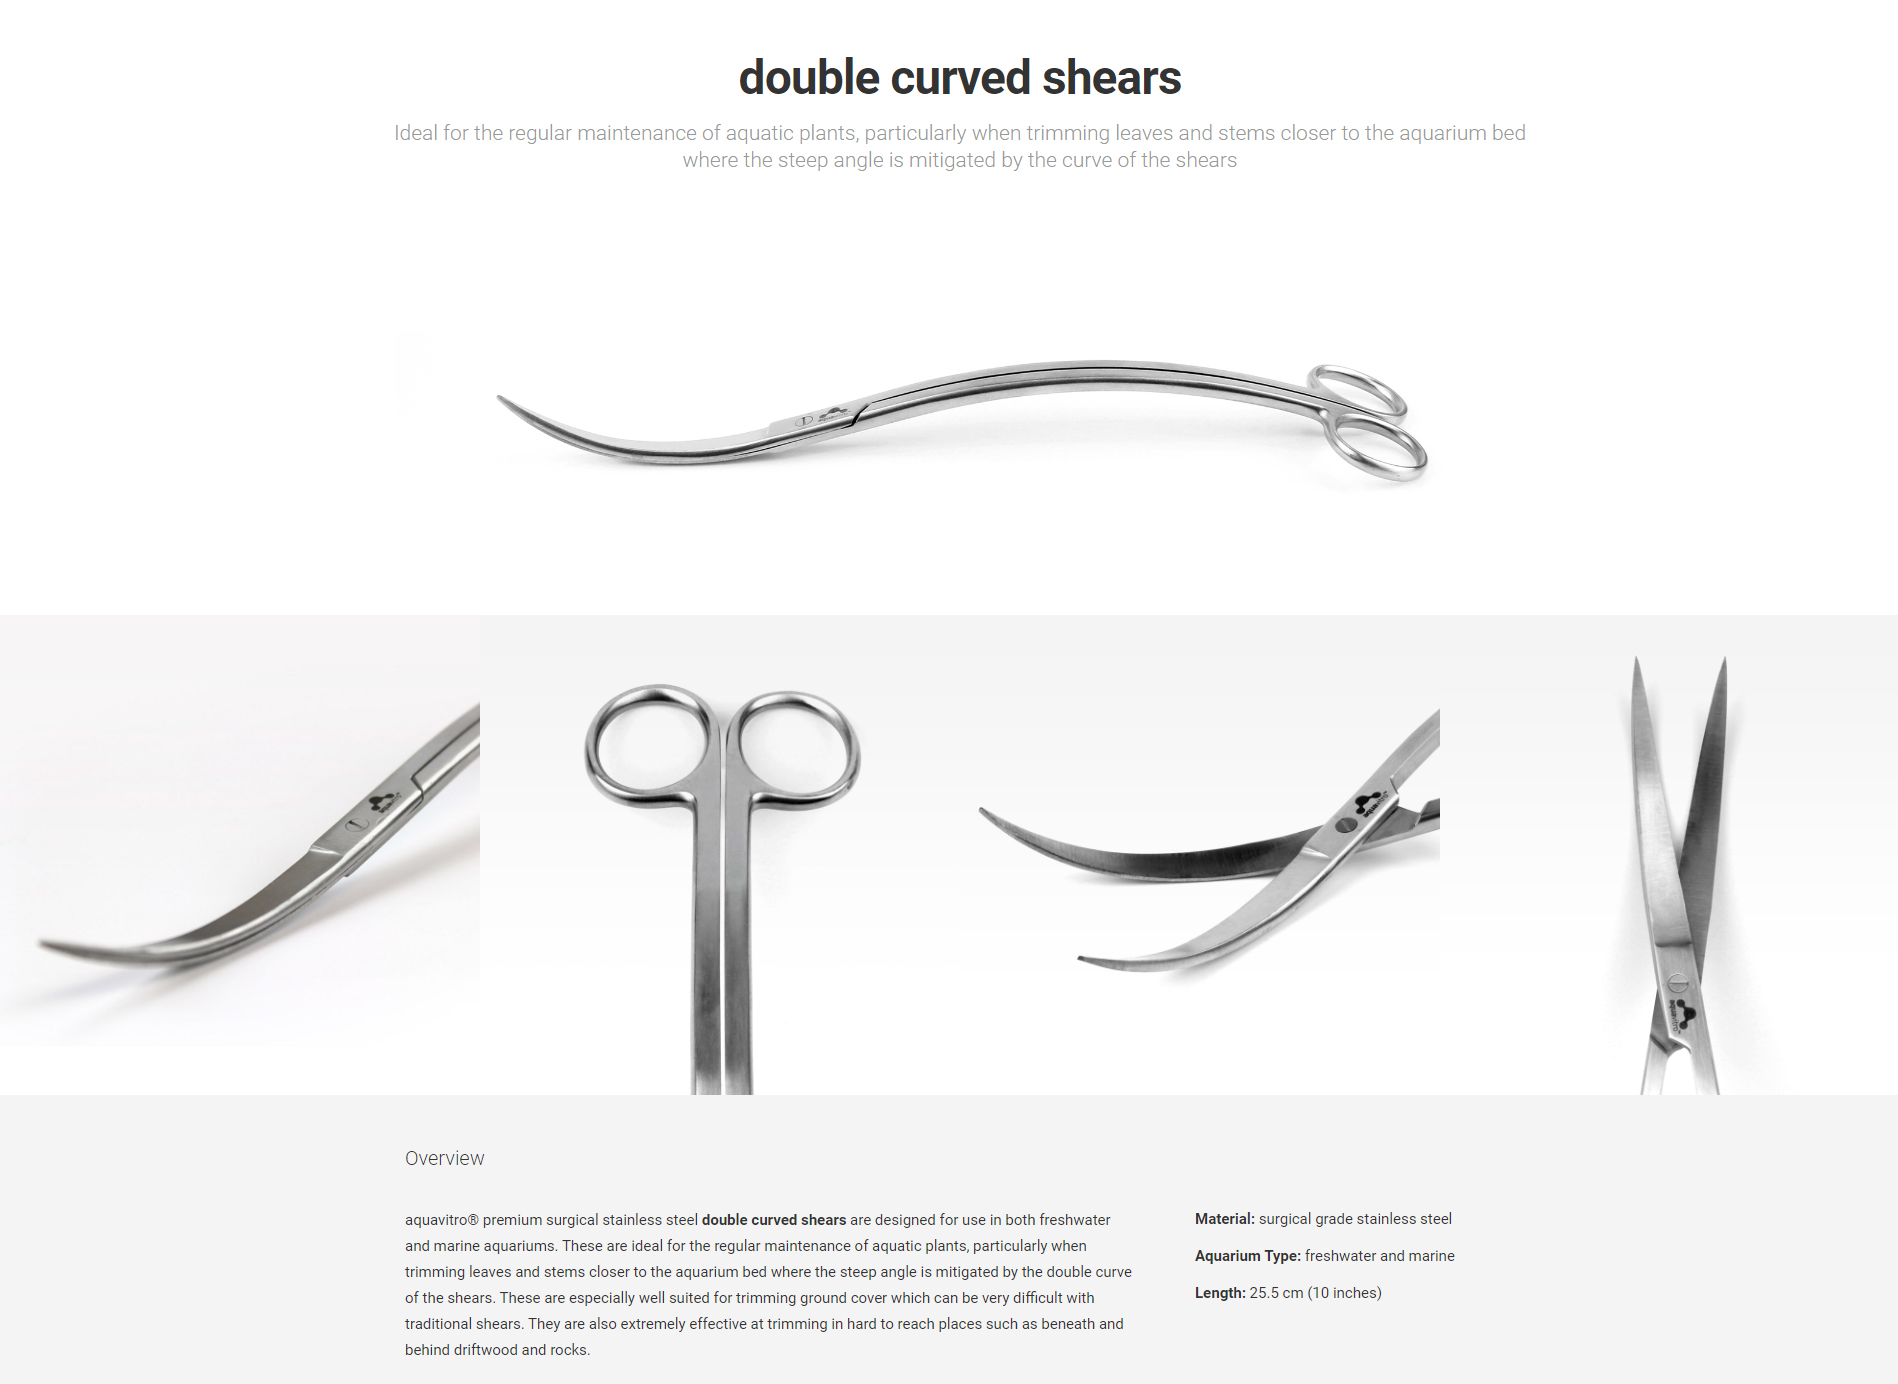 Double Curved Shears Writeup